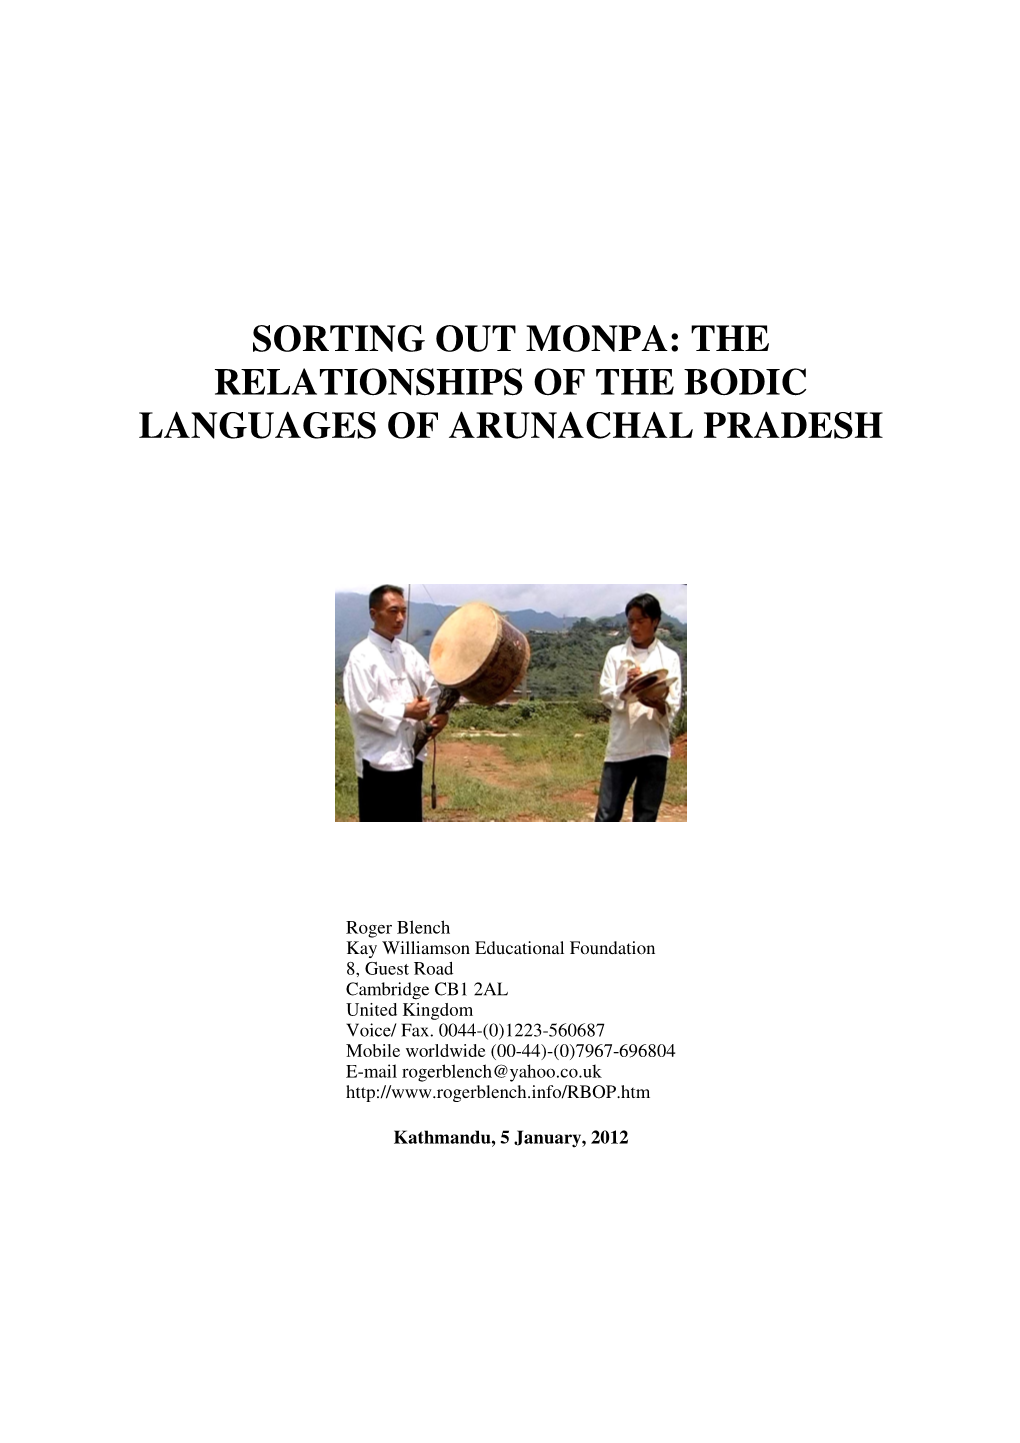 Sorting out Monpa: the Relationships of the Bodic Languages of Arunachal Pradesh